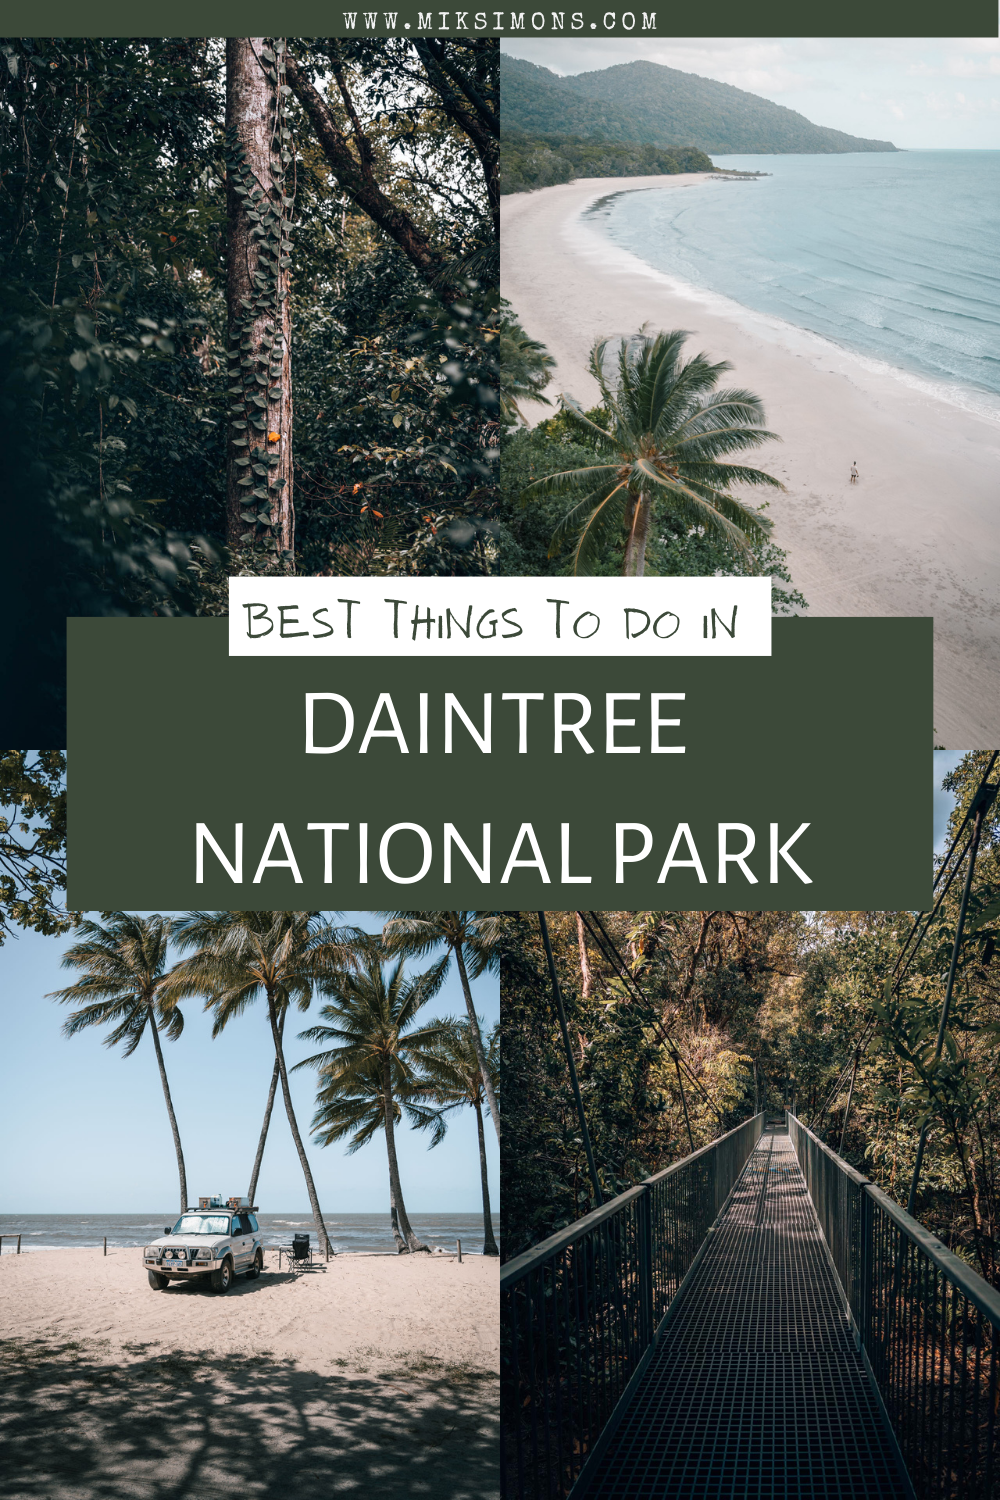 DAINTREE RAINFOREST - 11 AWESOME THINGS TO DO FROM CAIRNS TO CAPE TRIBULATION2